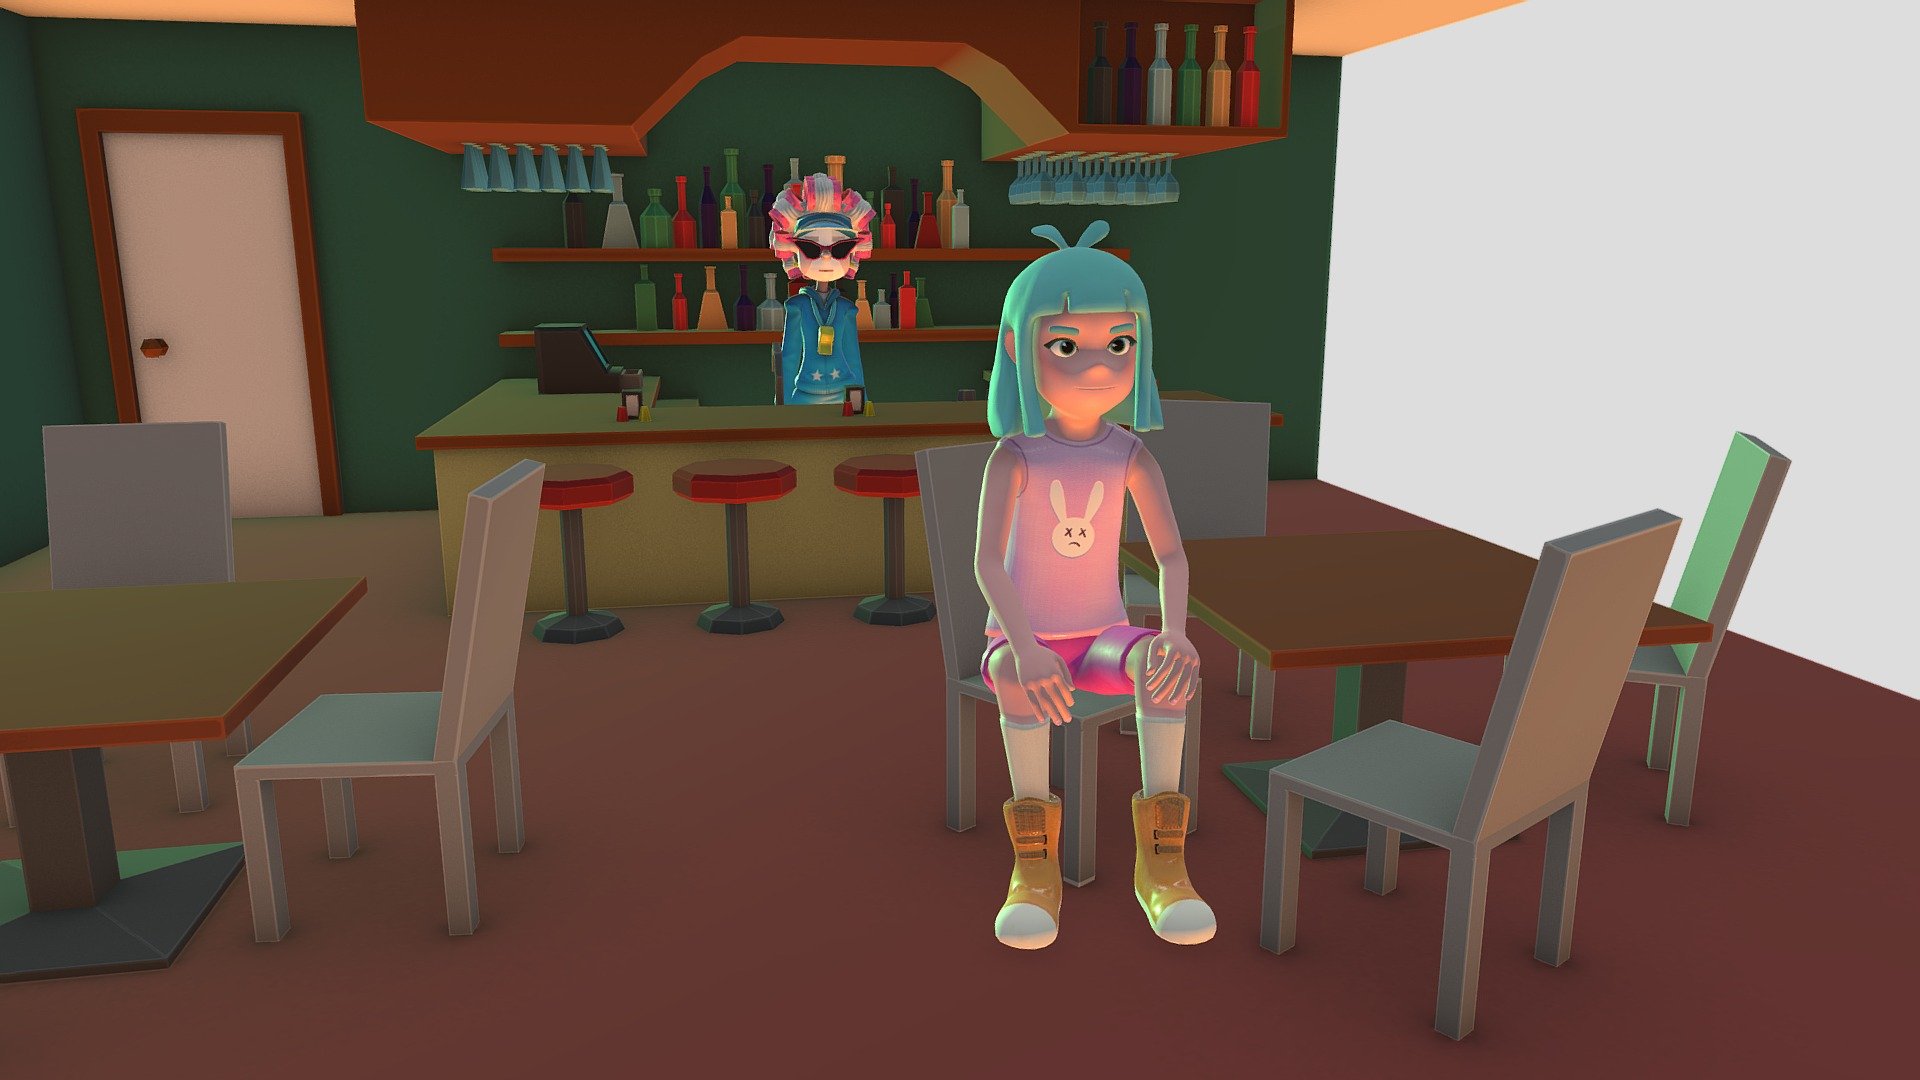 Animated Talking Cartoon Characters in a Bar Scene.

See this 3D model in action, and more models like it, in this collection of free augmented reality apps:

https://morpheusar.com/ - Animated Talking Cartoon Characters Bar Scene - 3D model by LasquetiSpice 3d model